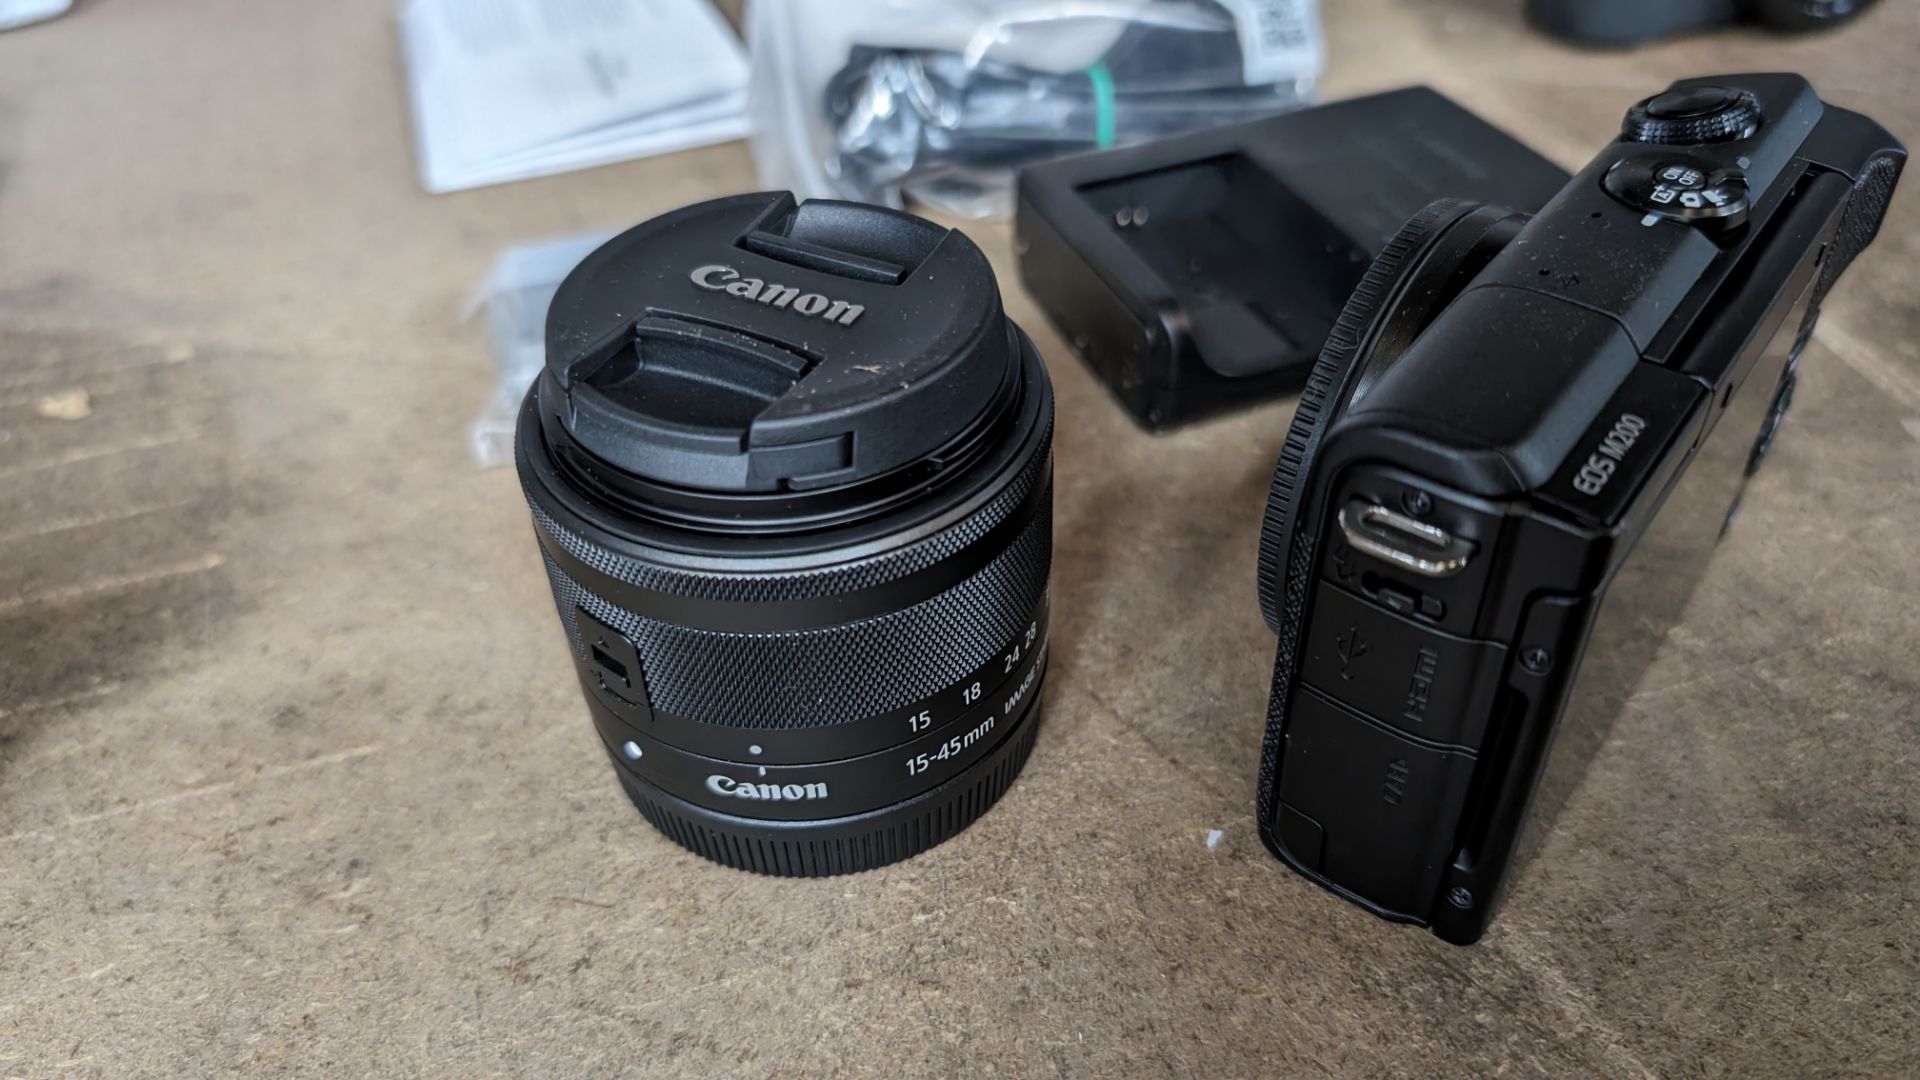 Canon EOS M200 camera kit, including 15-45mm image stabilizer lens, plus battery and charger - Bild 9 aus 12